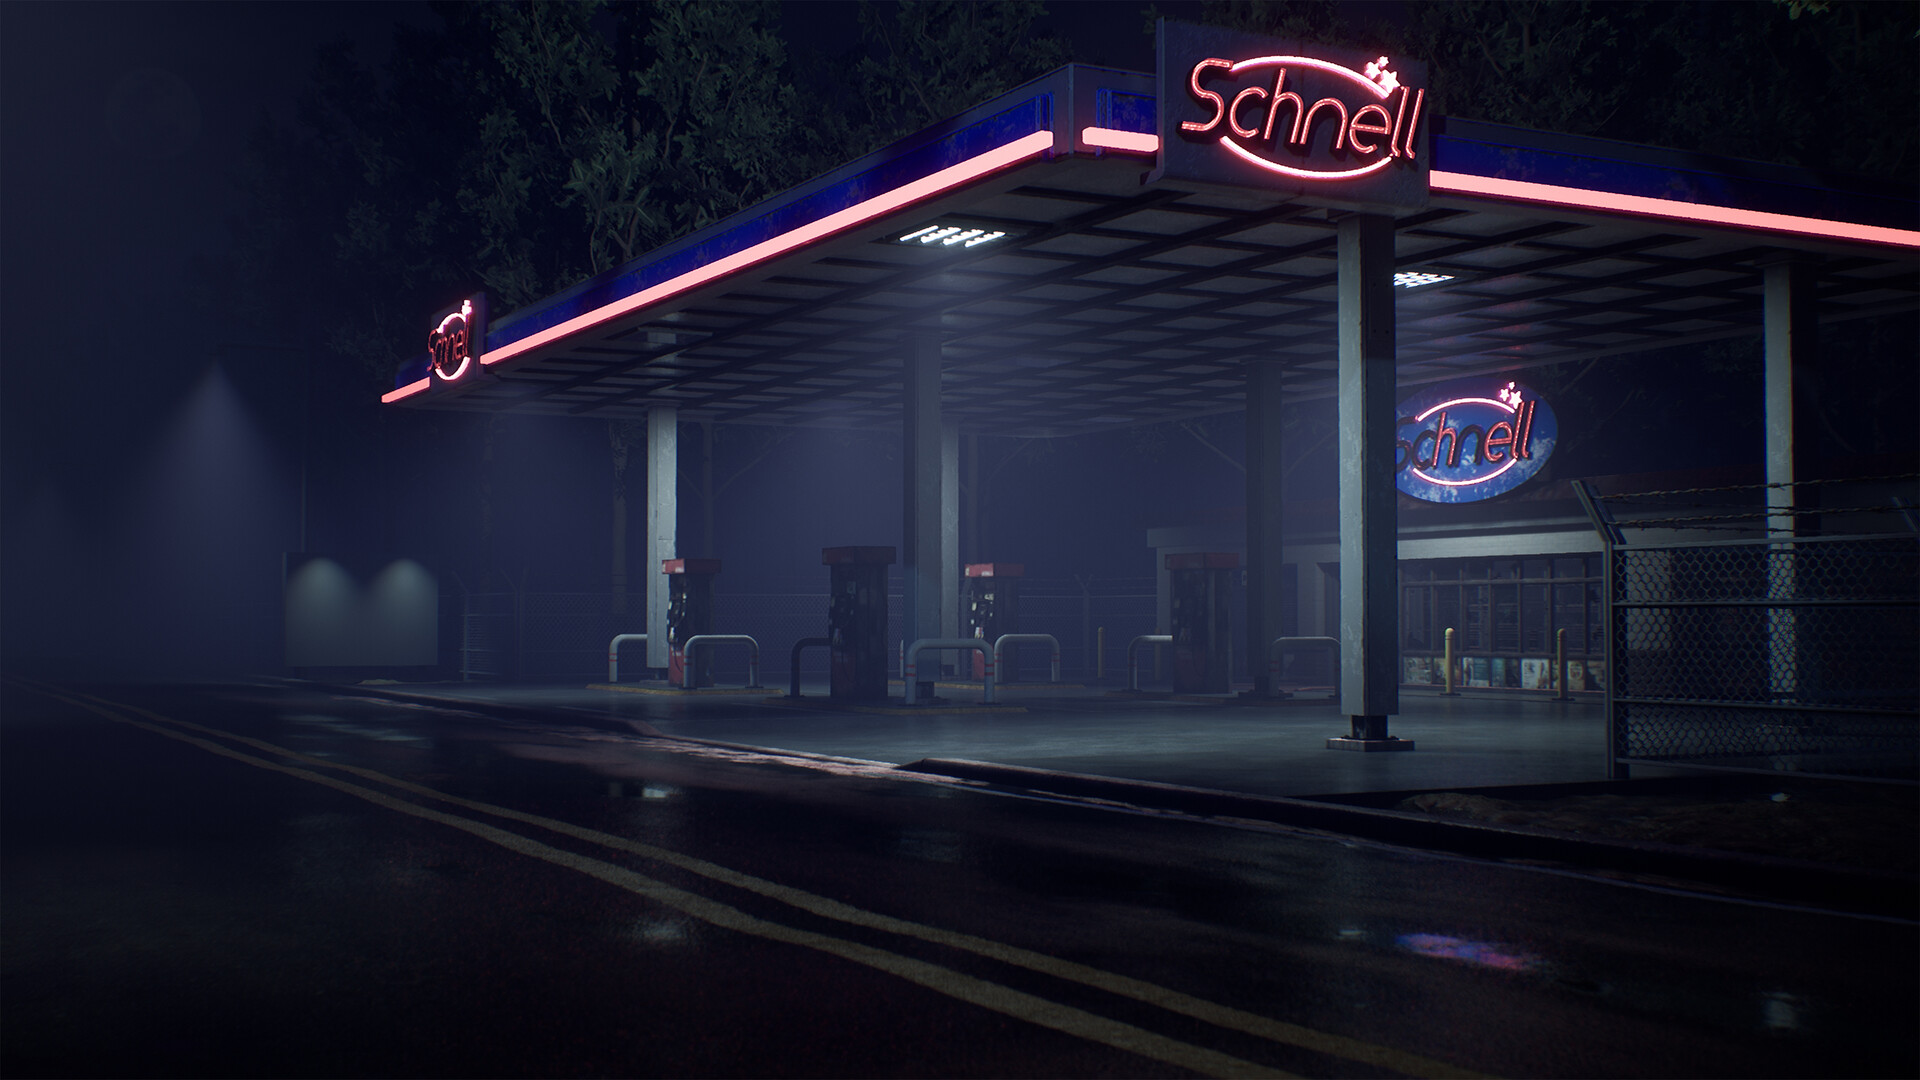 Neon Gas Station Wallpaper Free Neon Gas Station Background